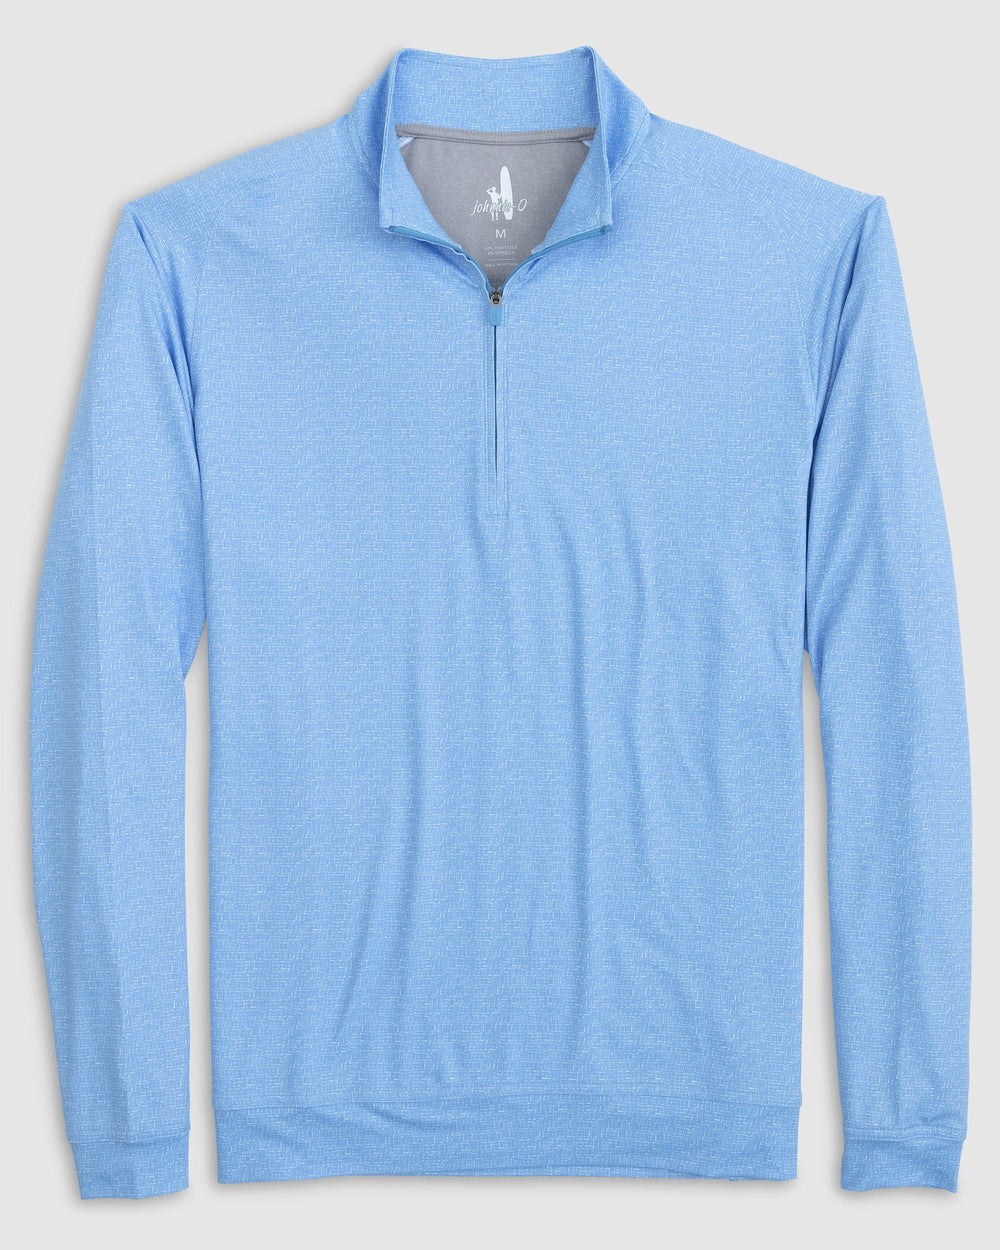 Johnnie-O Miltons Performance 1/4 Zip Pullover